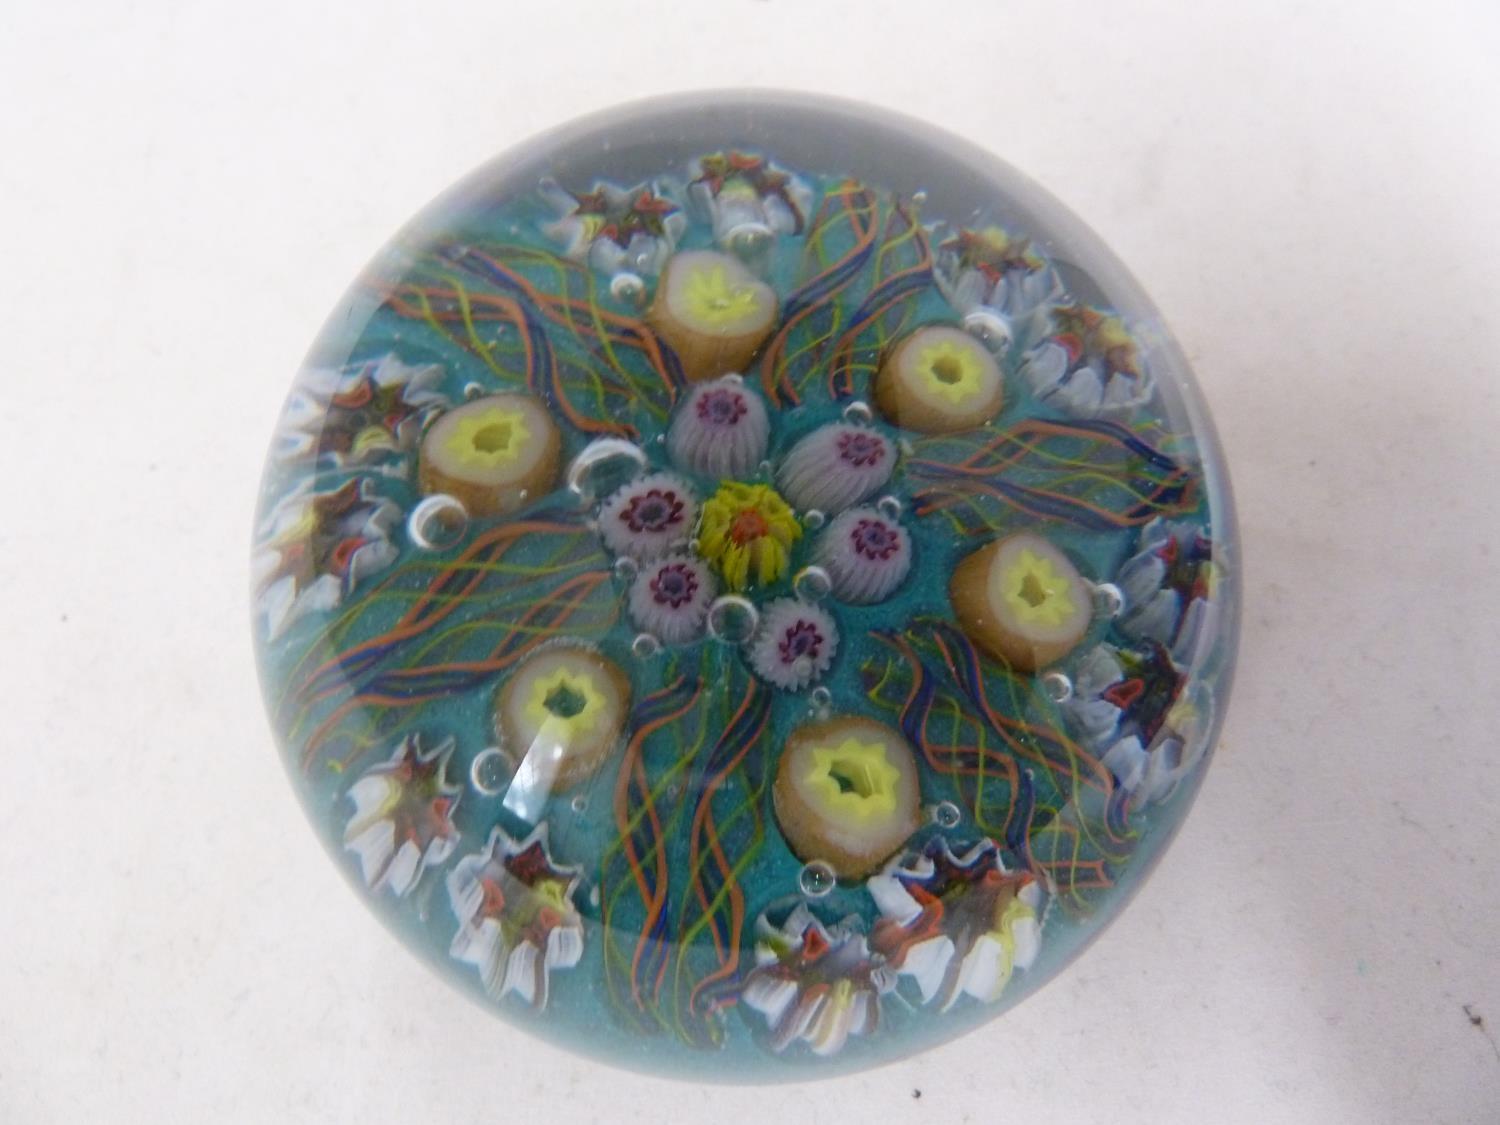 Strathern Glass - a boxed millifiori and barley twist cane glass paperweight; and a Salvador Ysart - Image 6 of 8